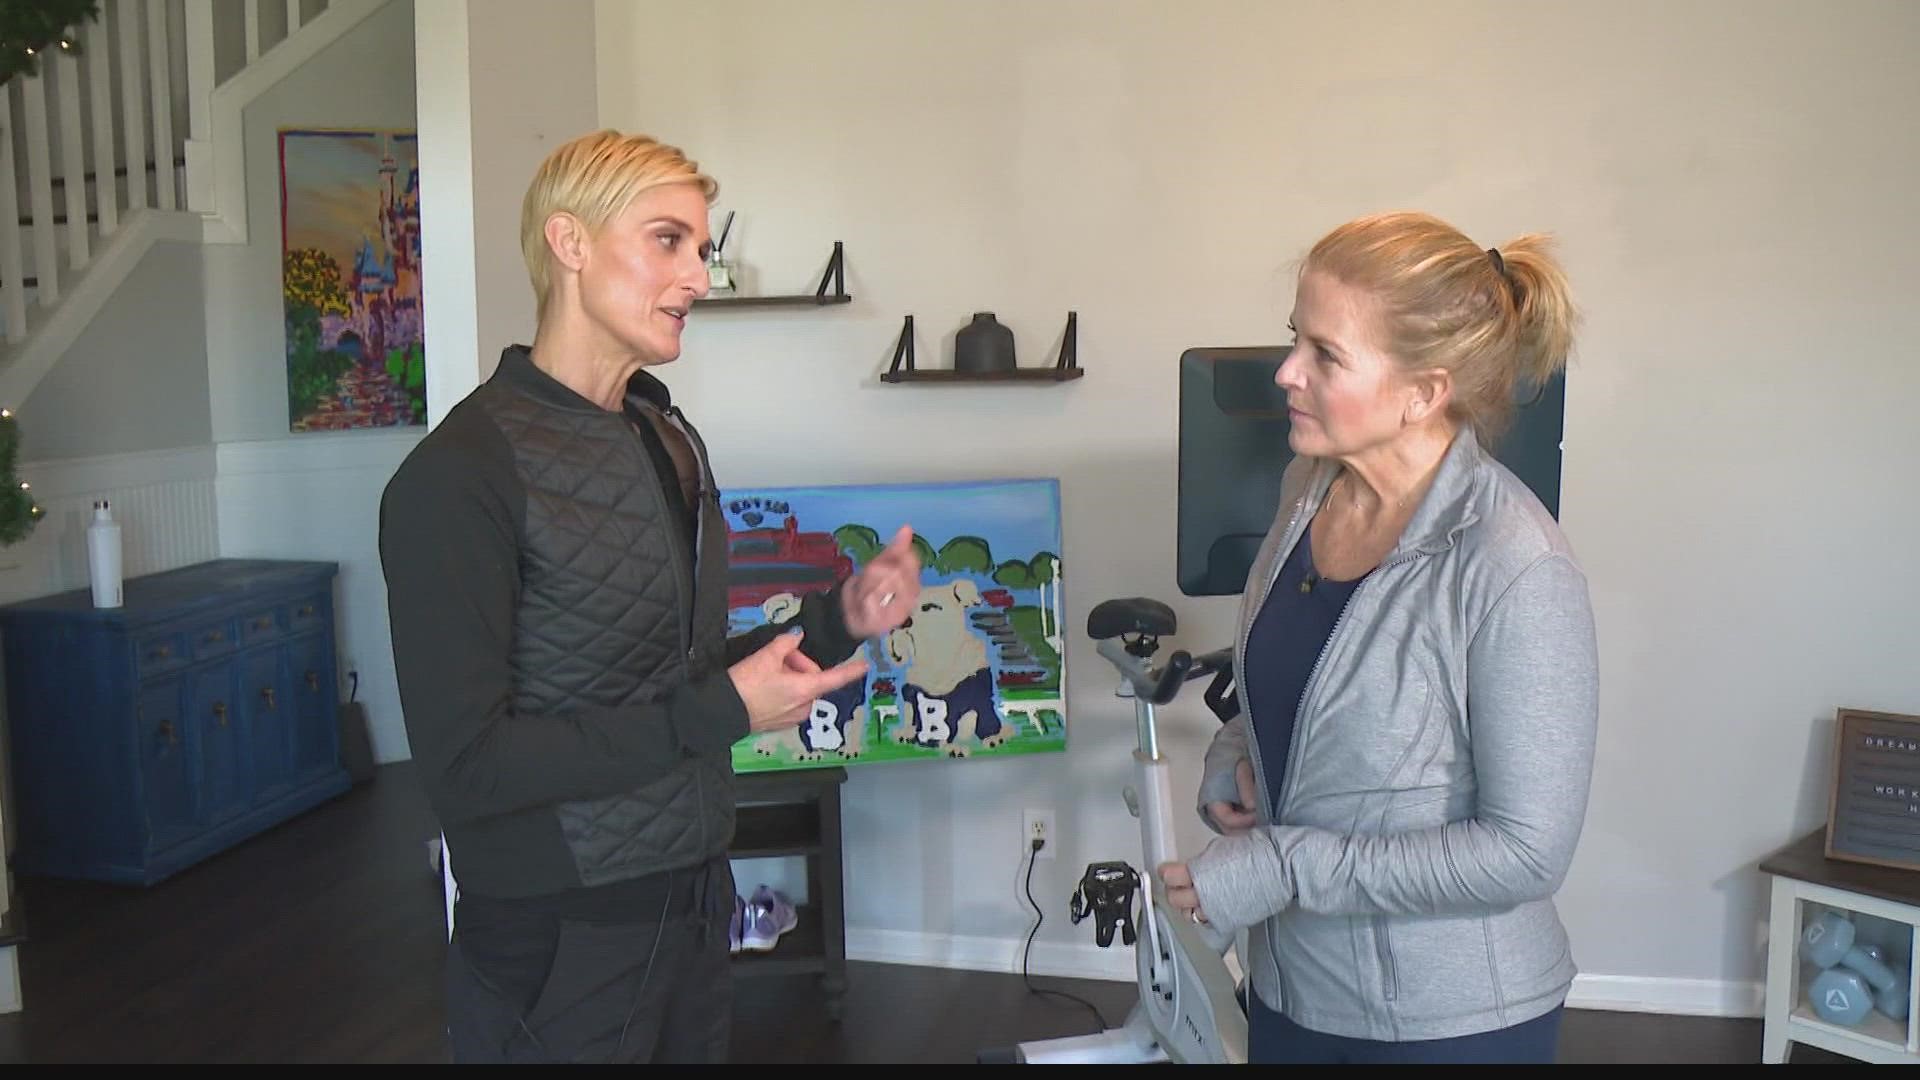 Health and fitness expert Julie Voris explained the importance of your morning routine.